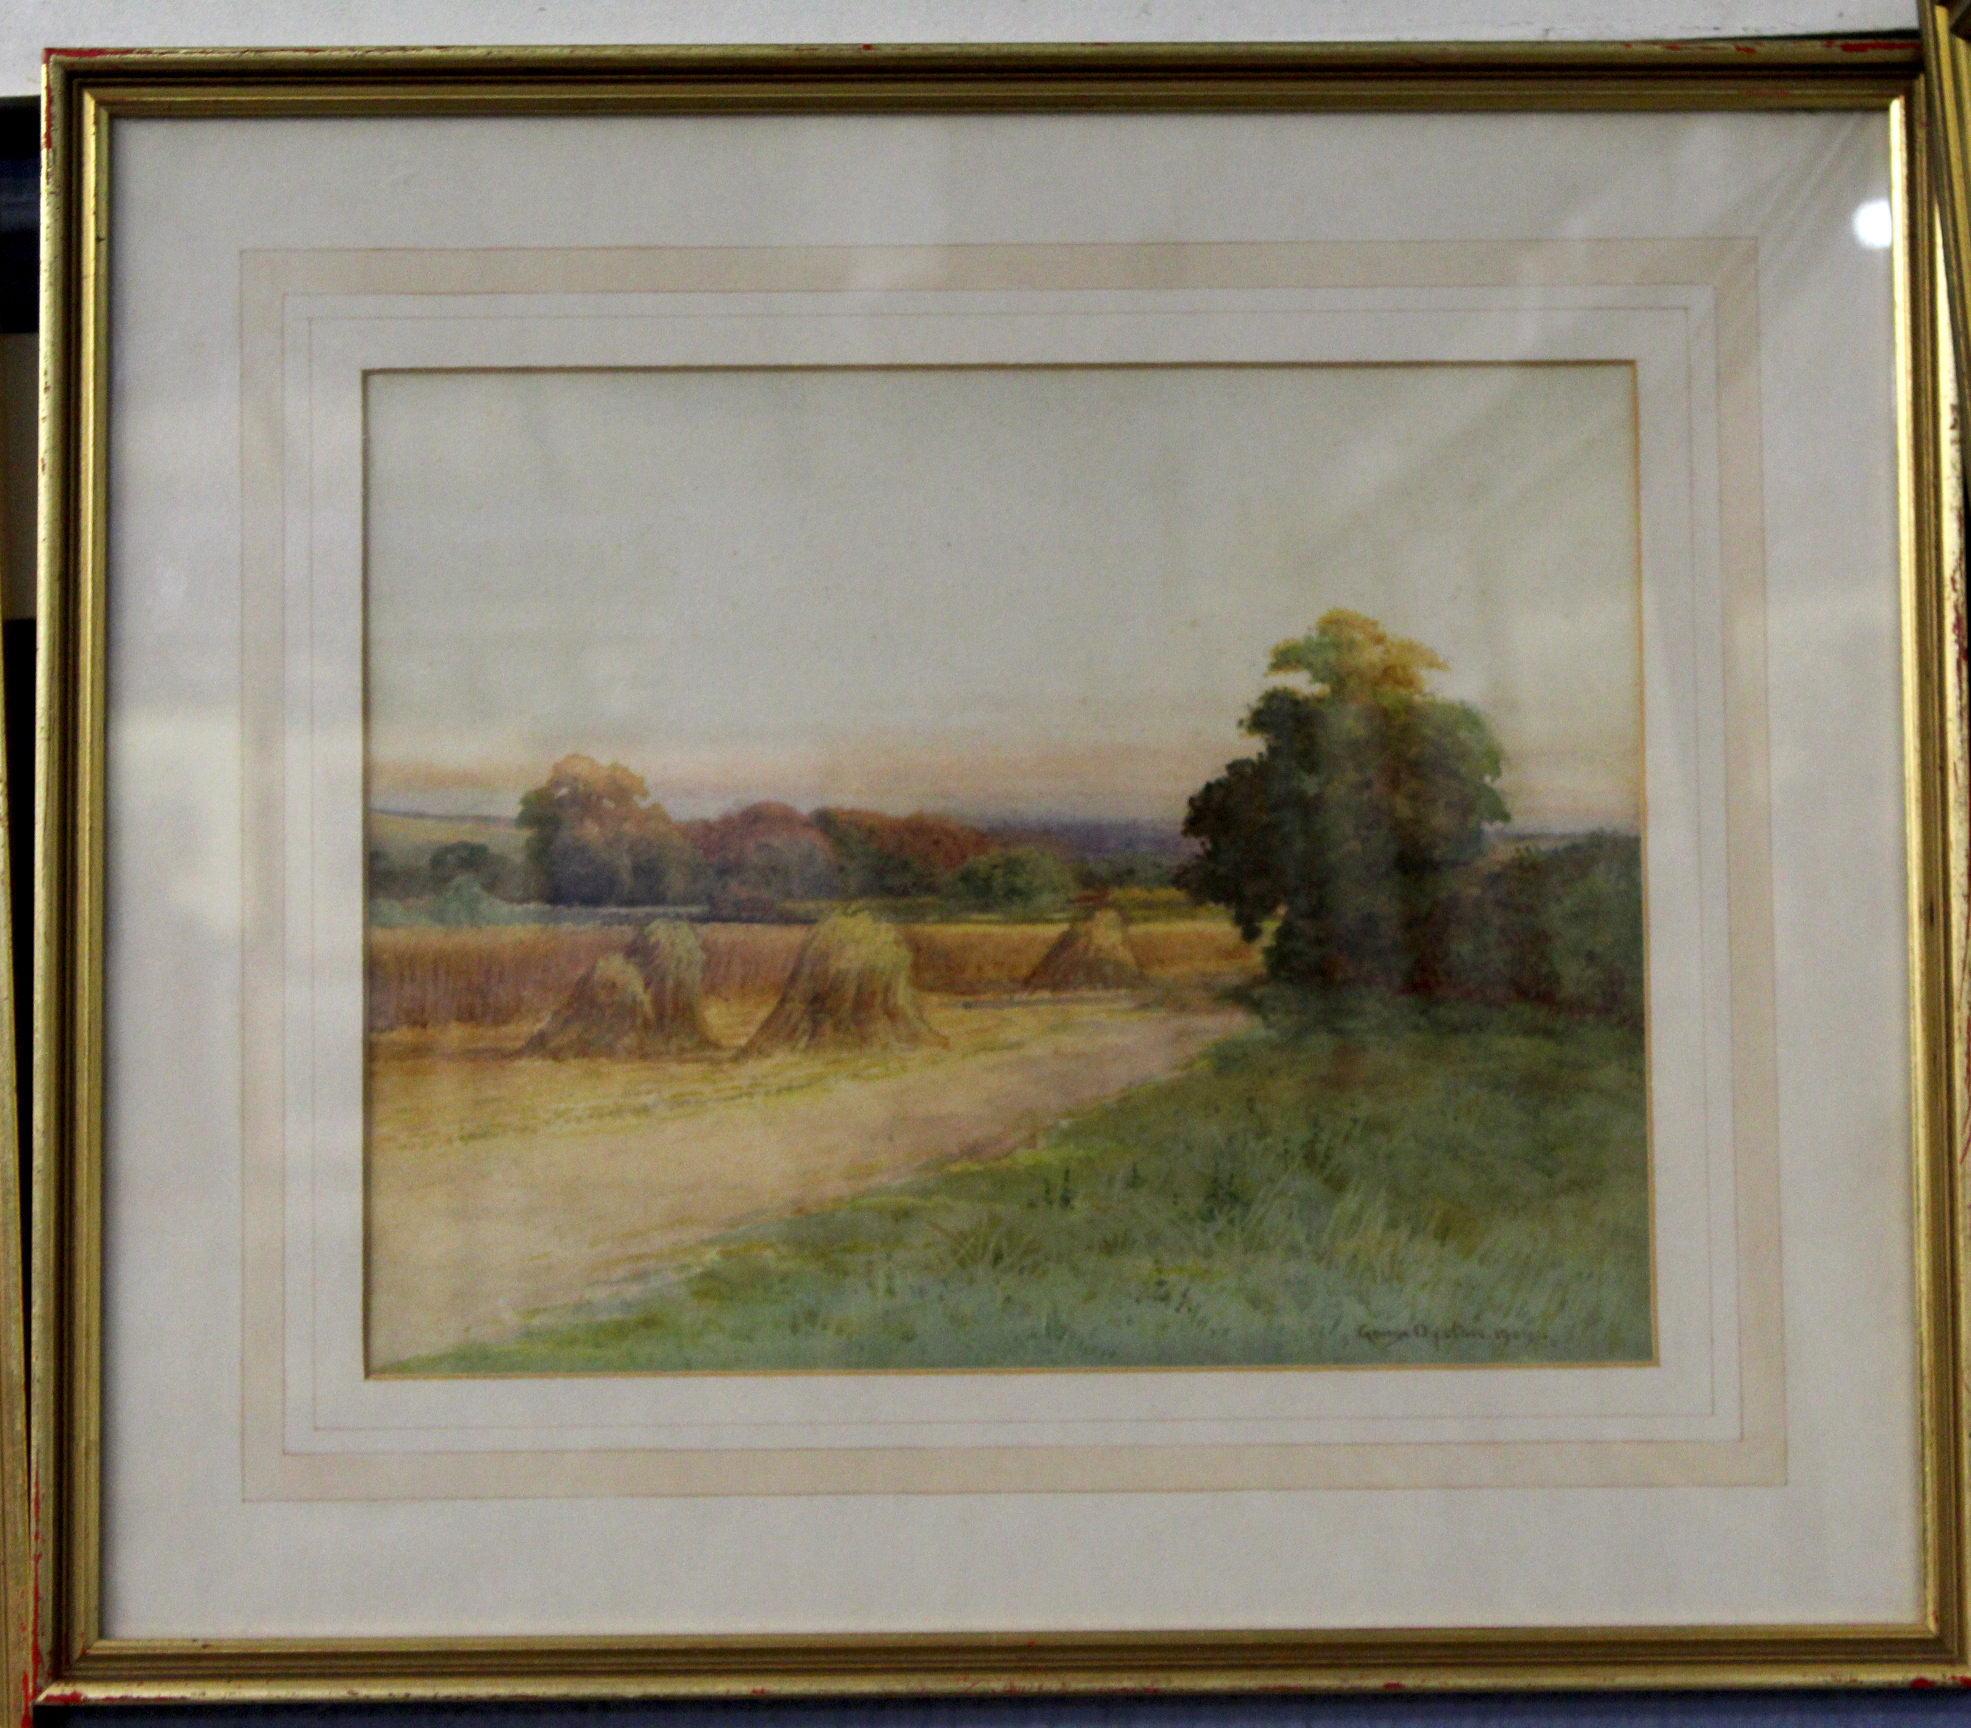 George Oyston, signed pair of watercolours, In the harvest fields at sunset, 22 x 28cms (2) - Image 2 of 2